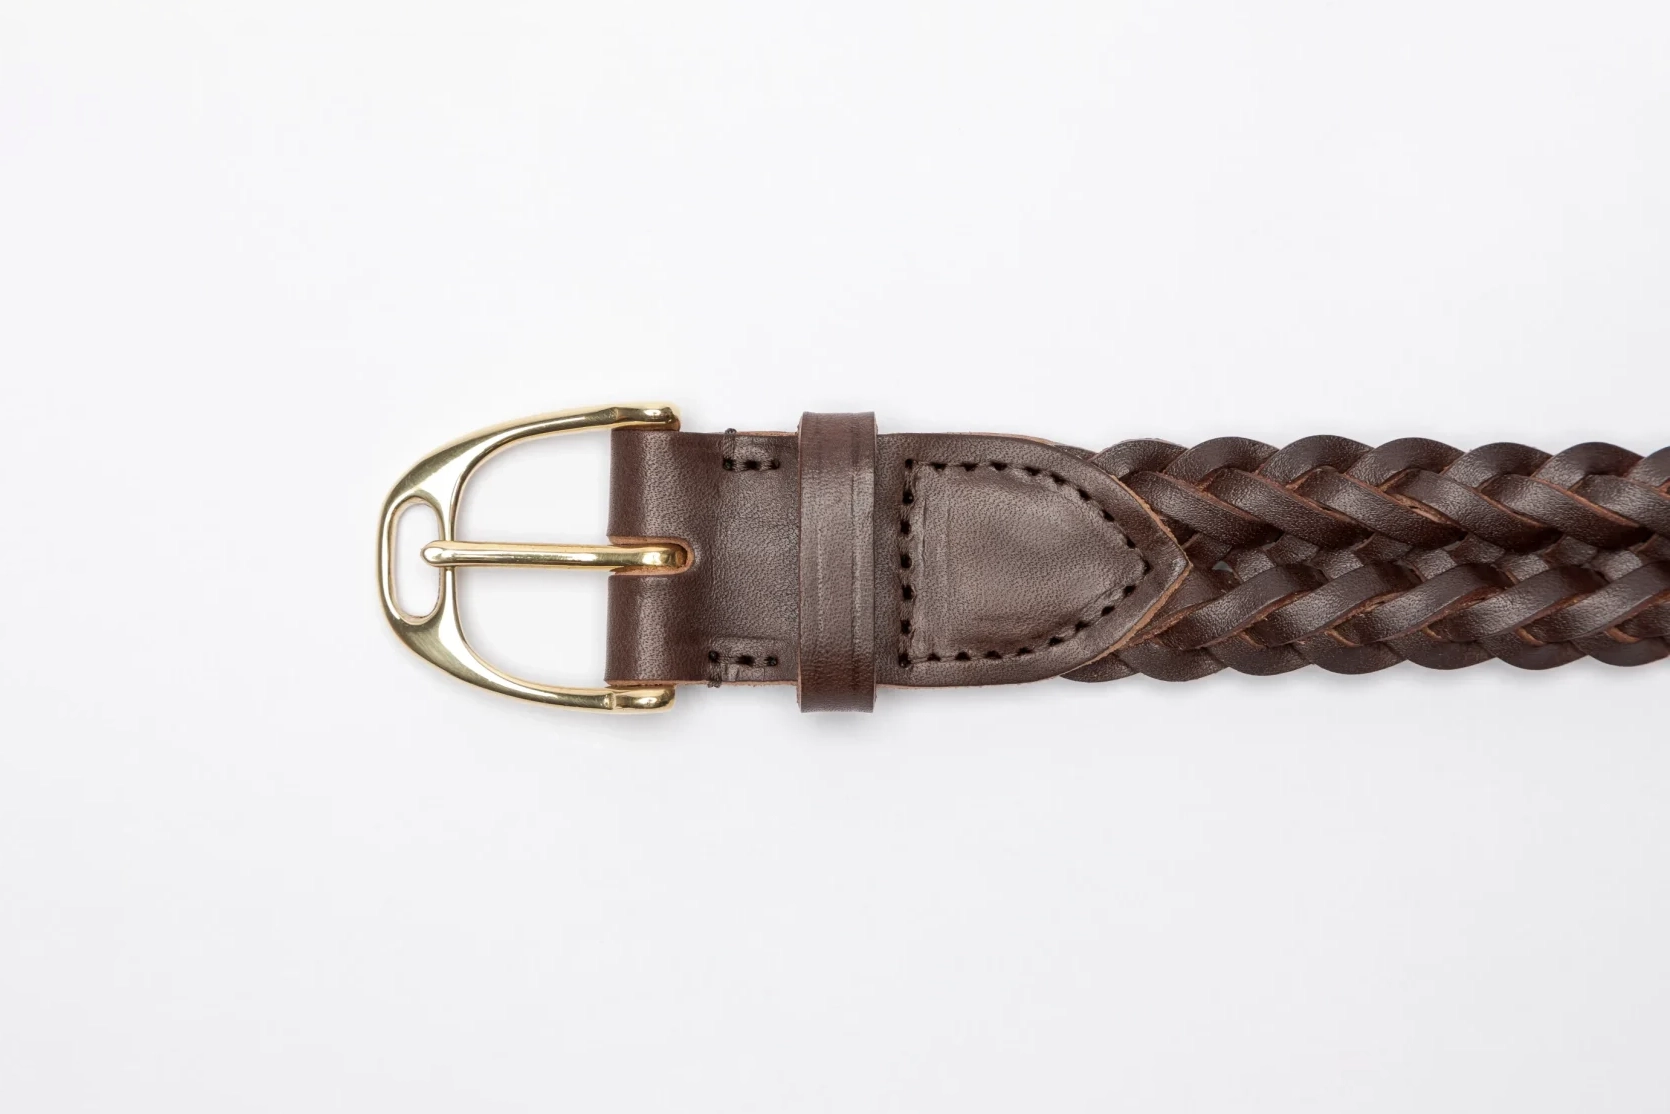 Braided belt in black leather, Quality full grain leather